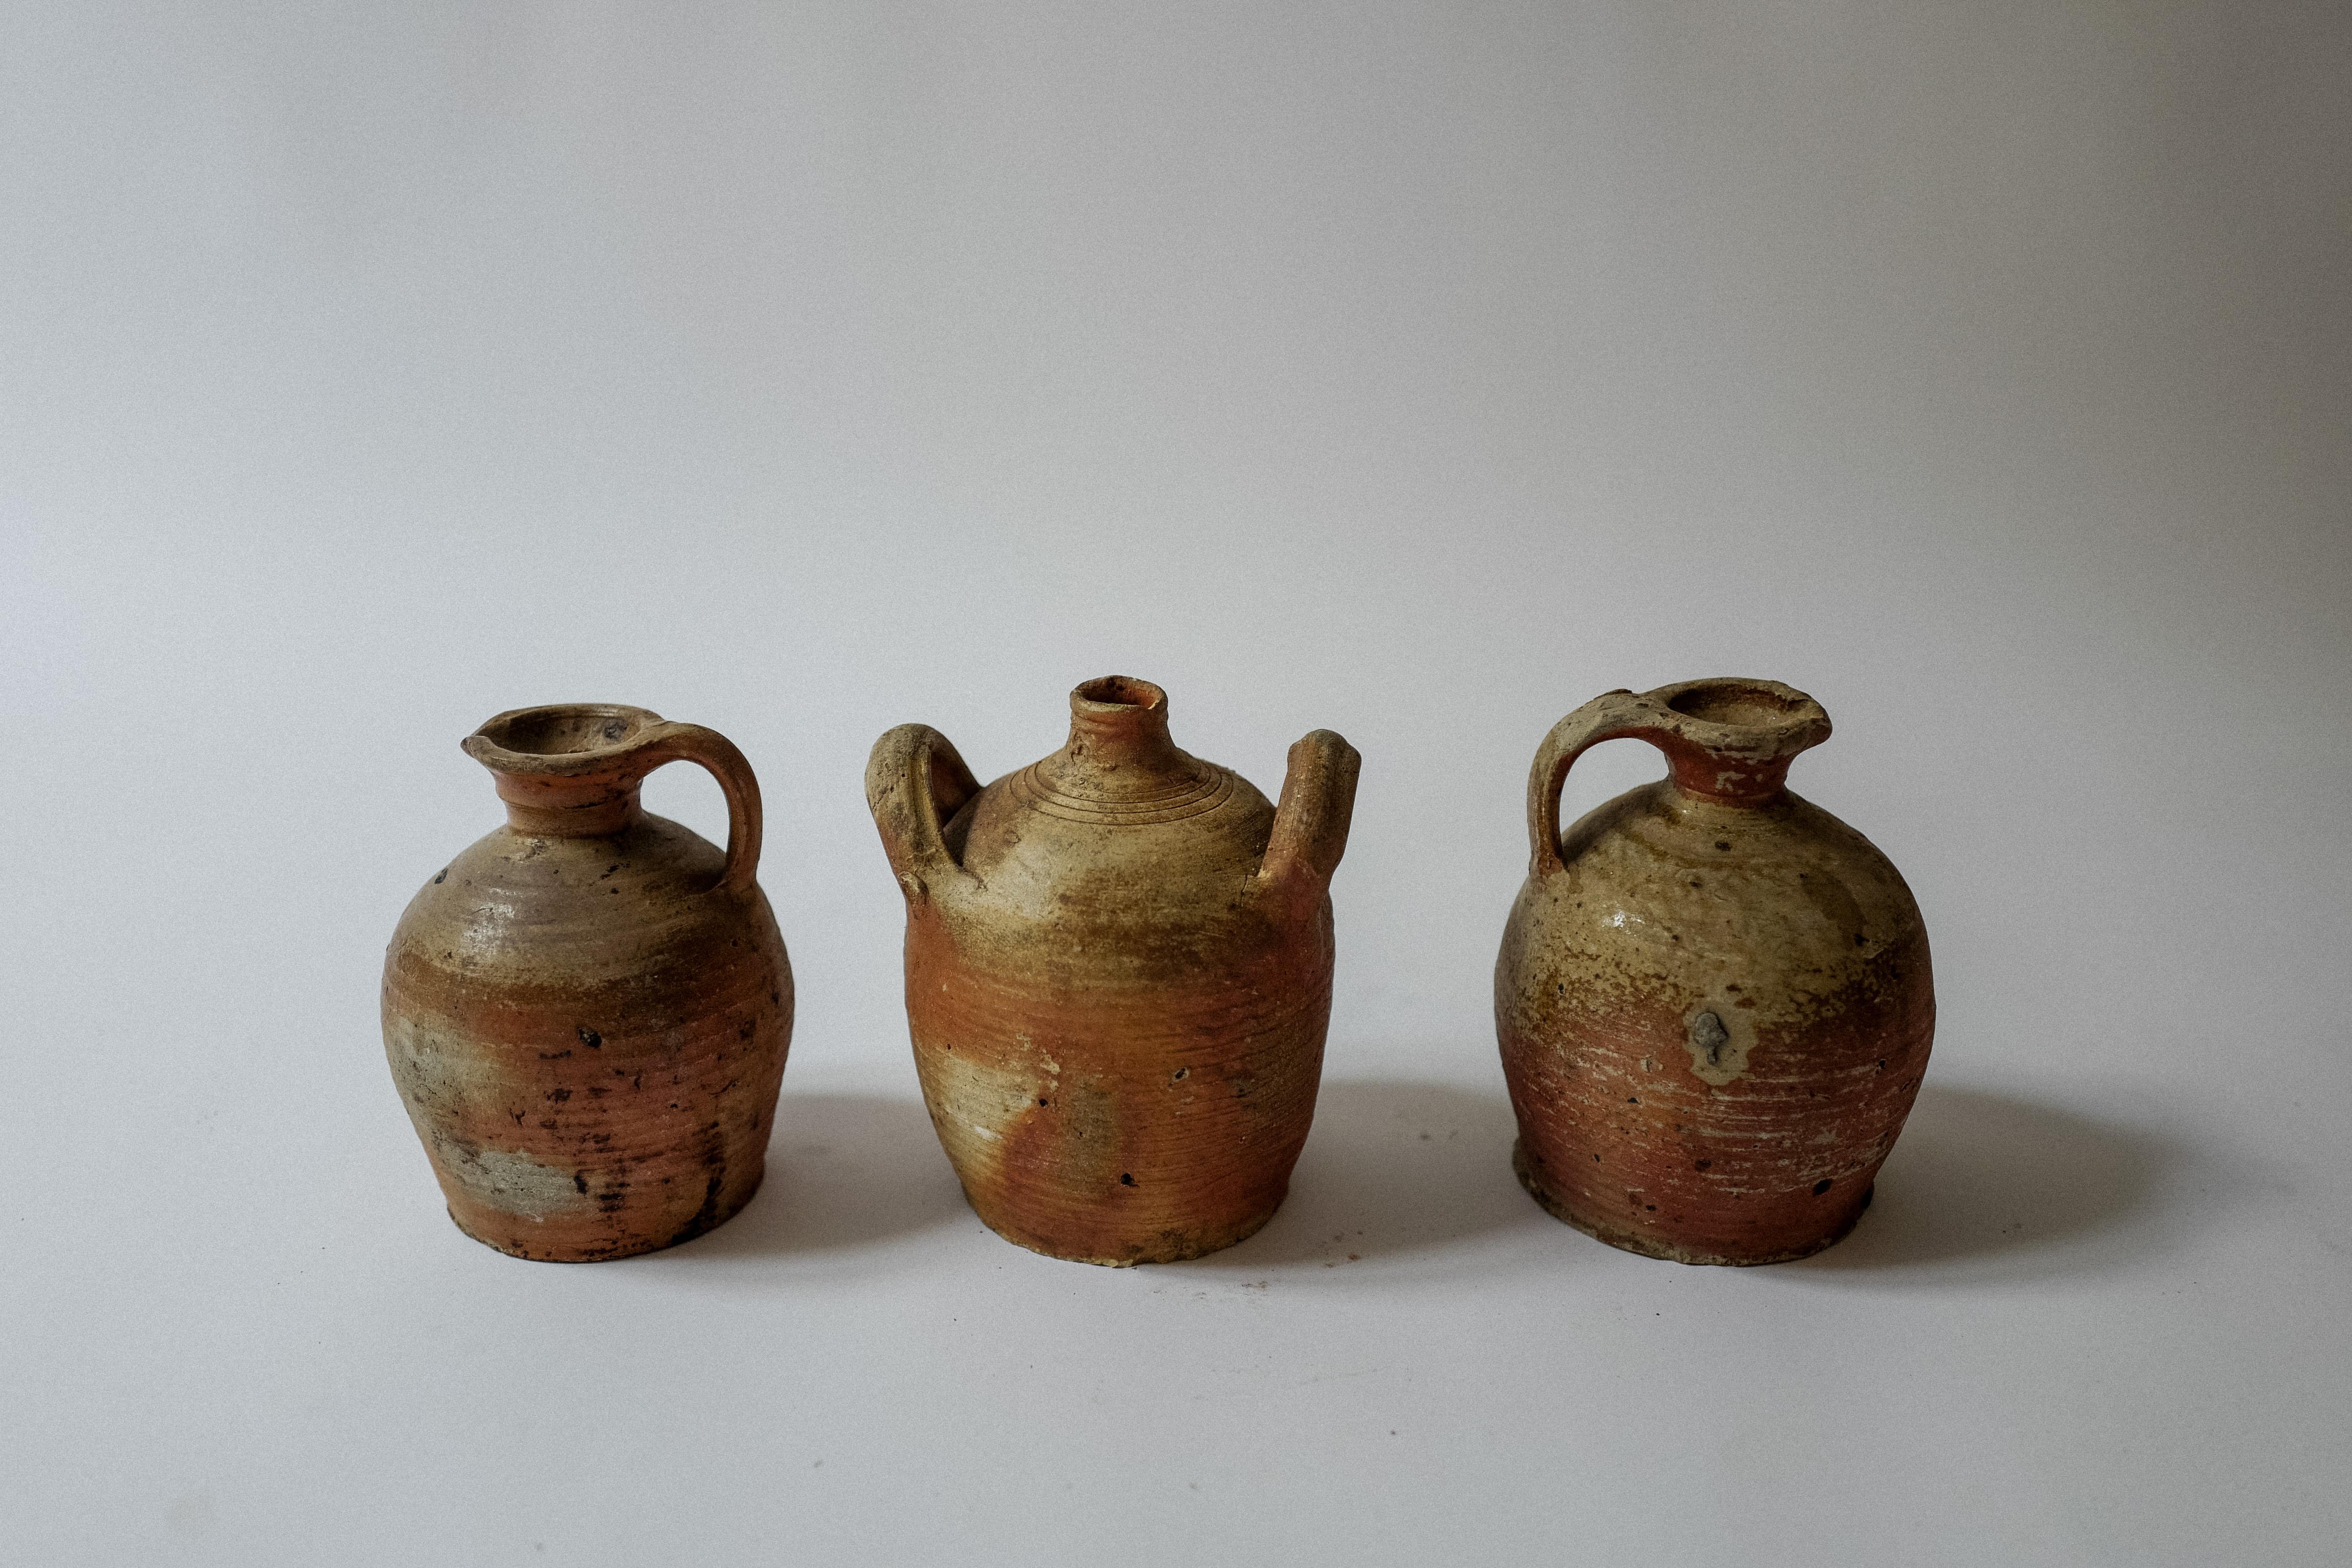 Set of 3 French Provincial Stoneware Pottery Water Jugs from the 19th century. Beautiful time worn patina.